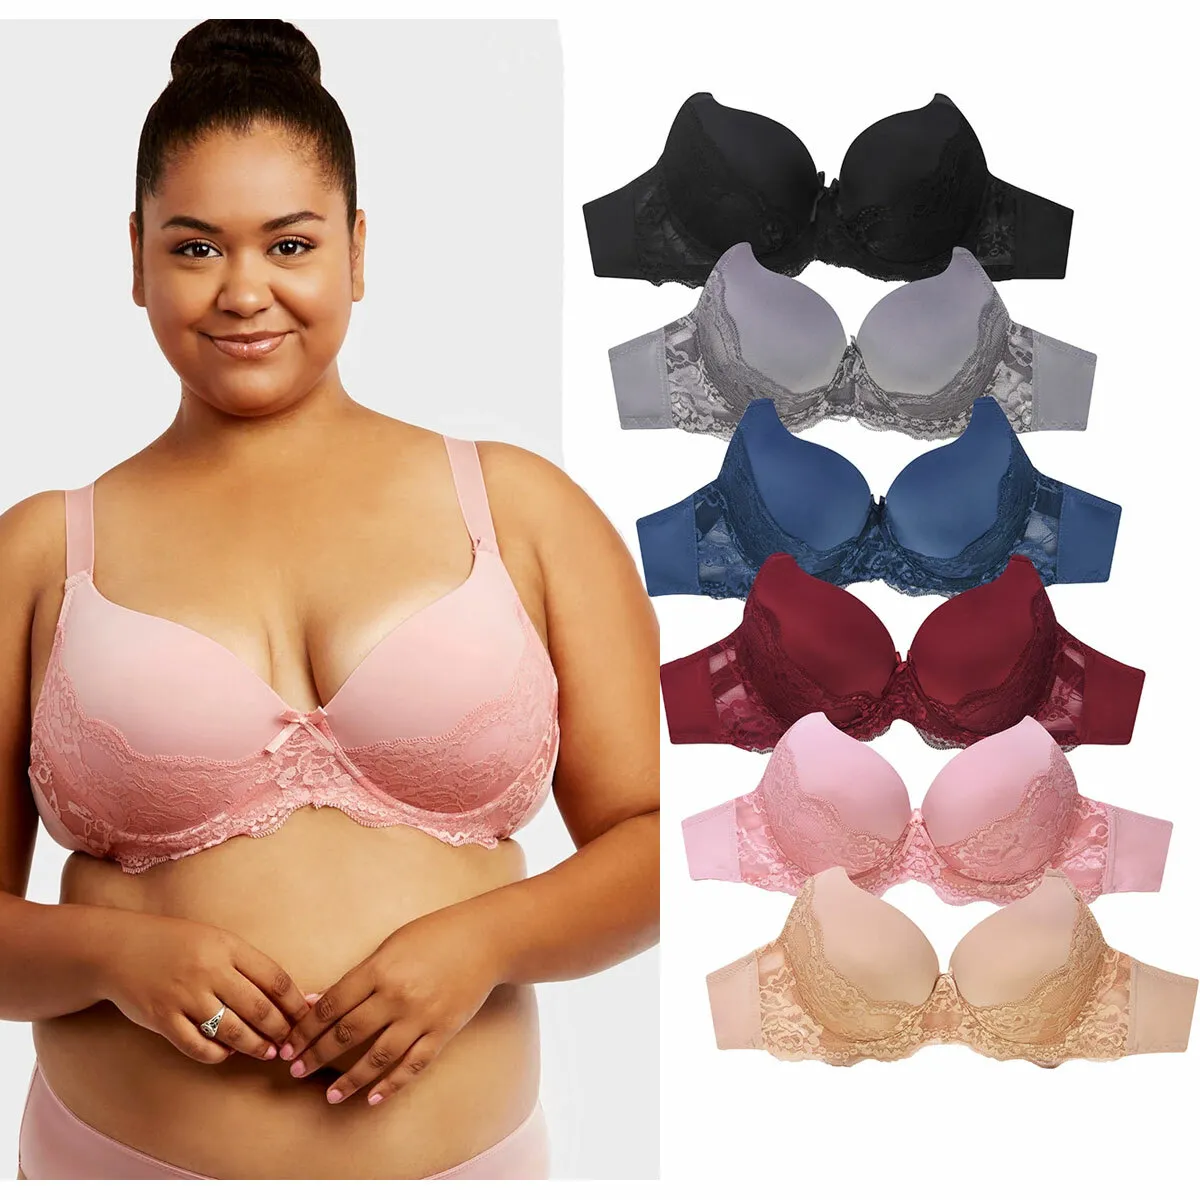 danielle porterfield recommends what does a 34dd look like pic